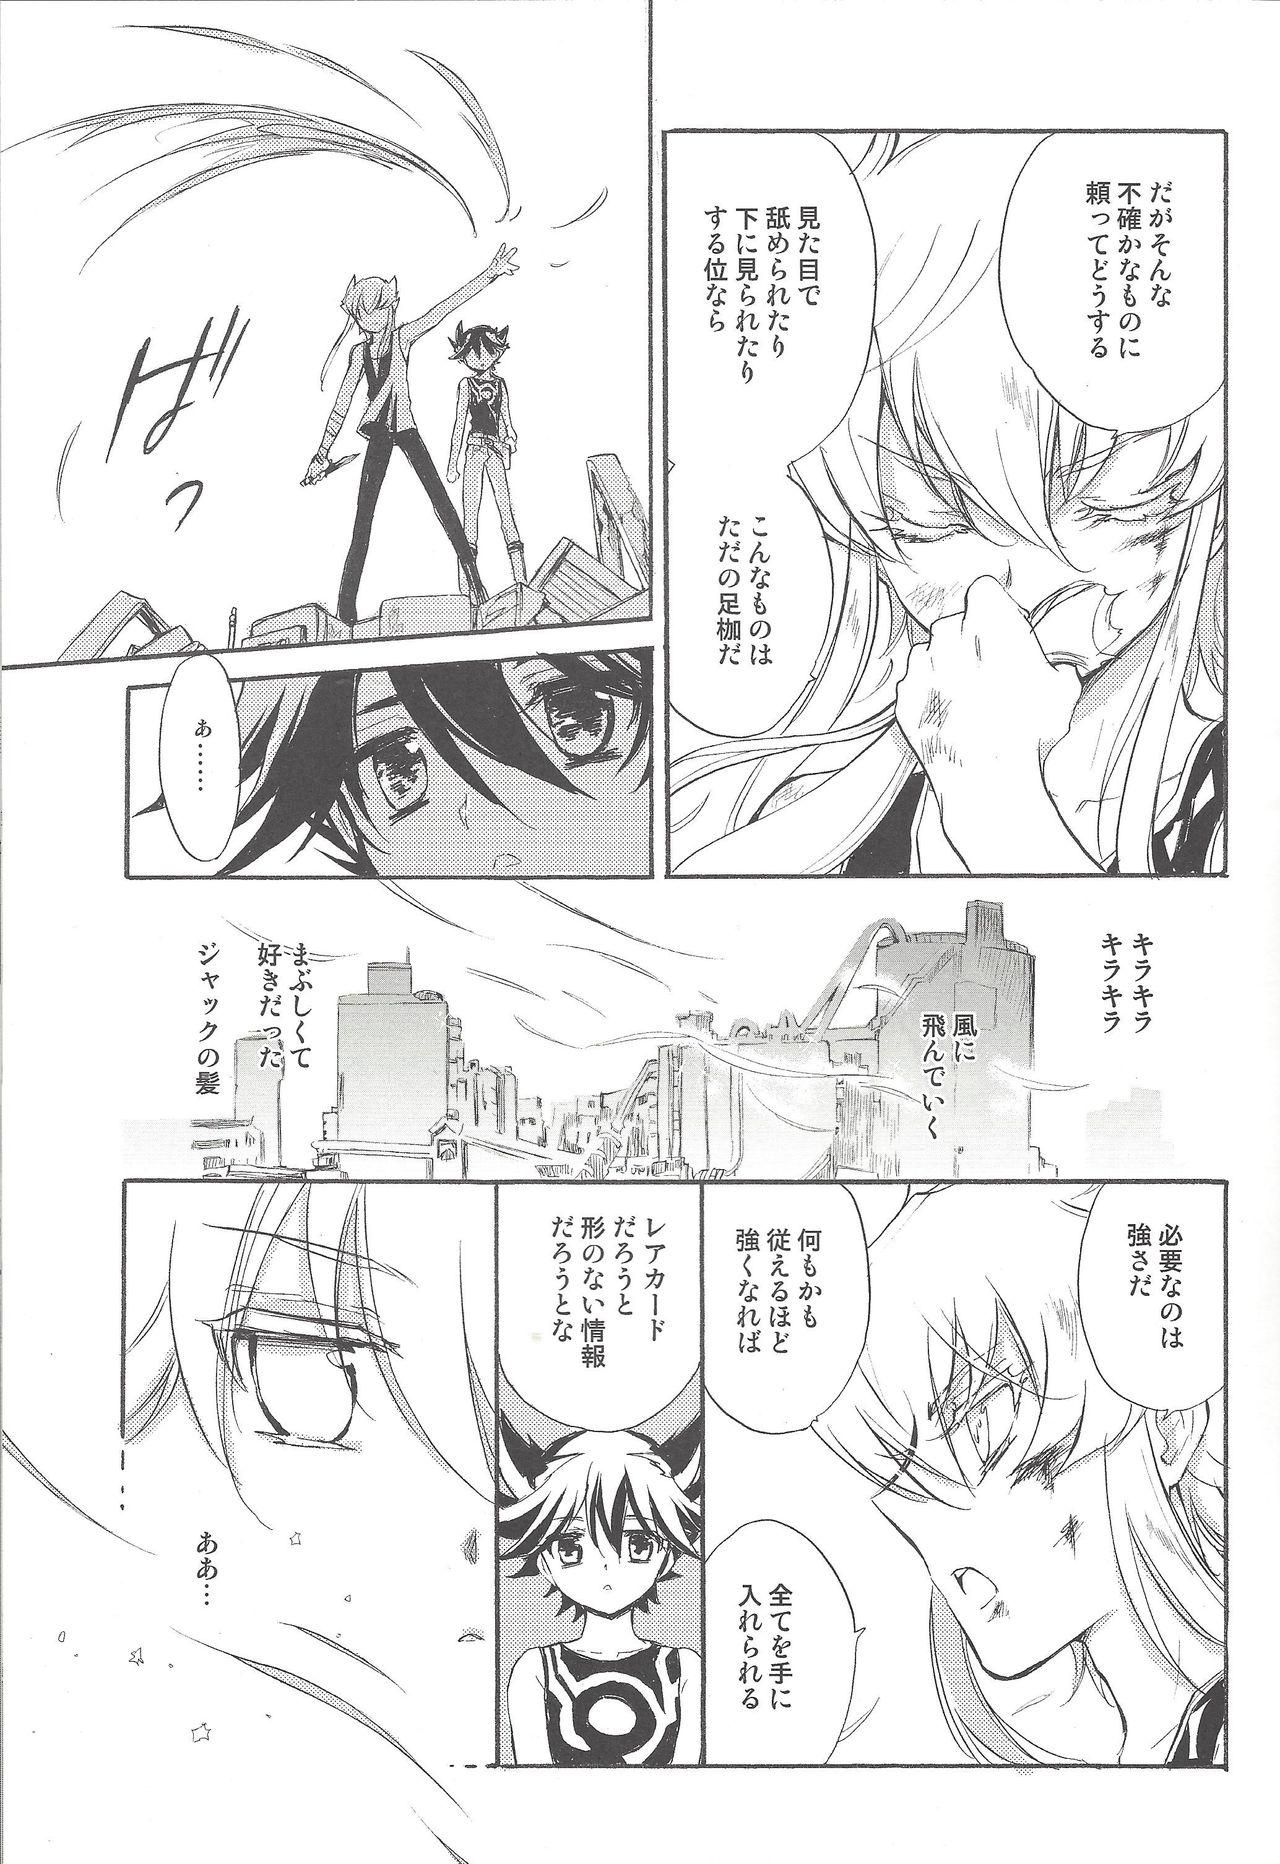 Massage Sex Hoshi no Love Letter - Yu-gi-oh 5ds Perra - Page 12